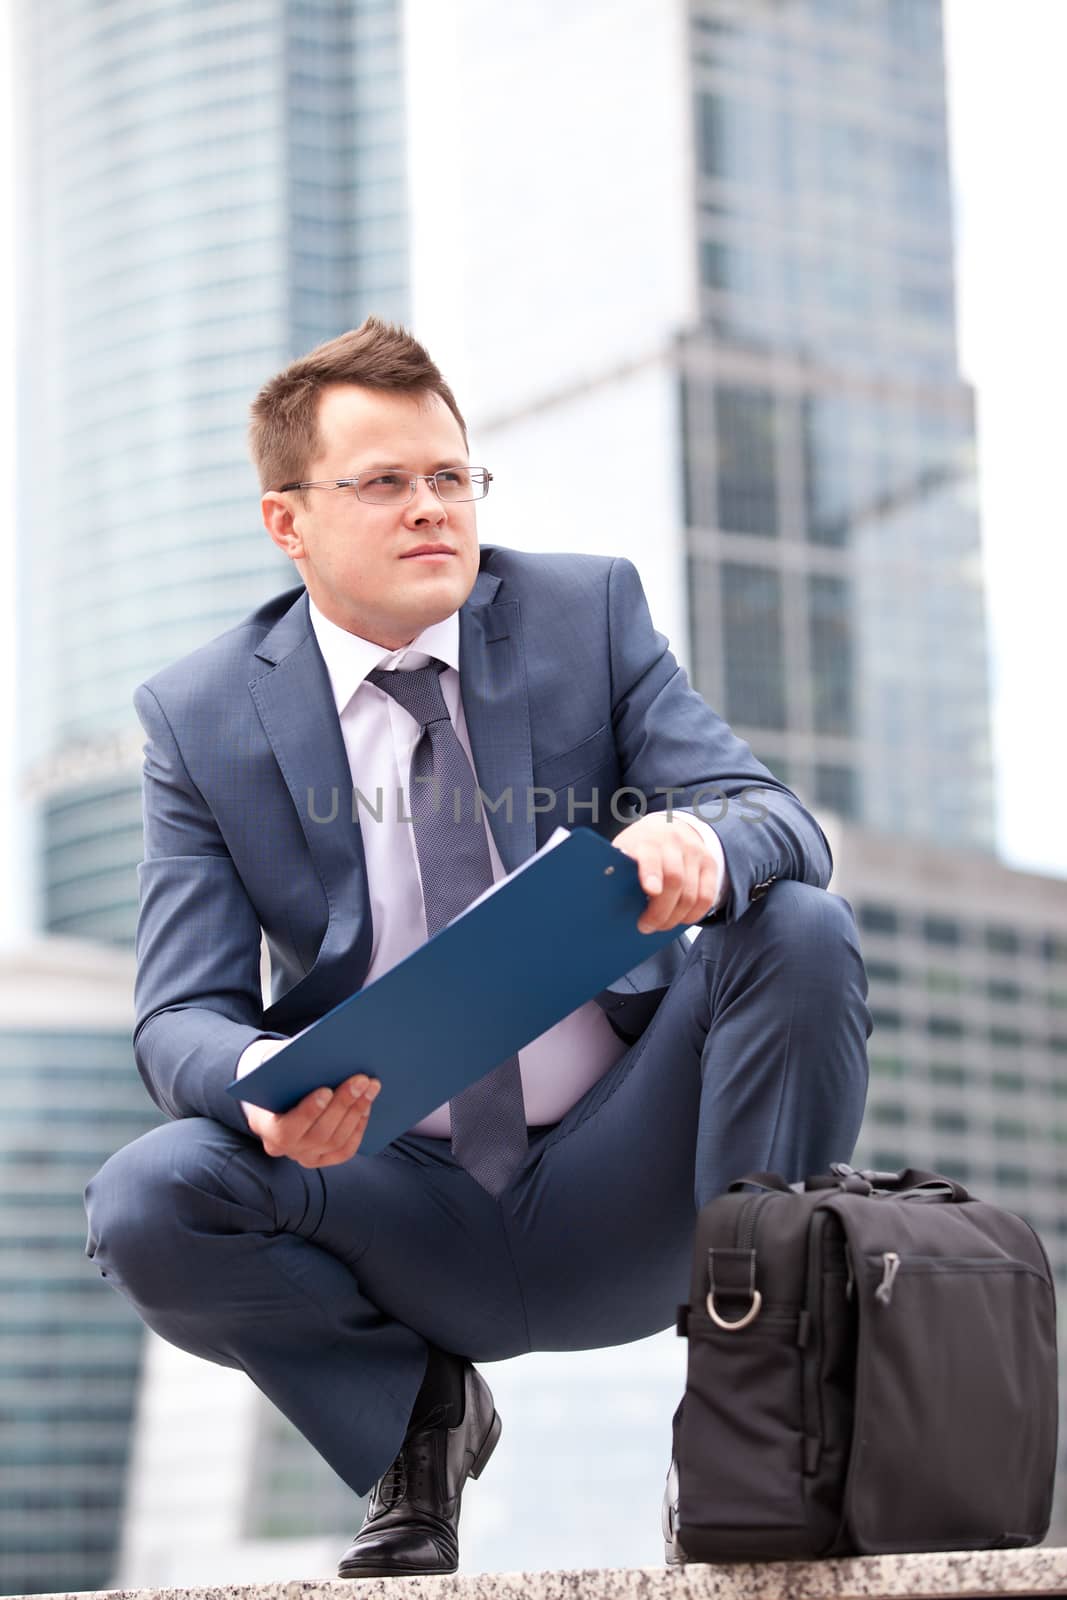 successful businessman sitting on his haunches and holding planning, against the background of office buildings